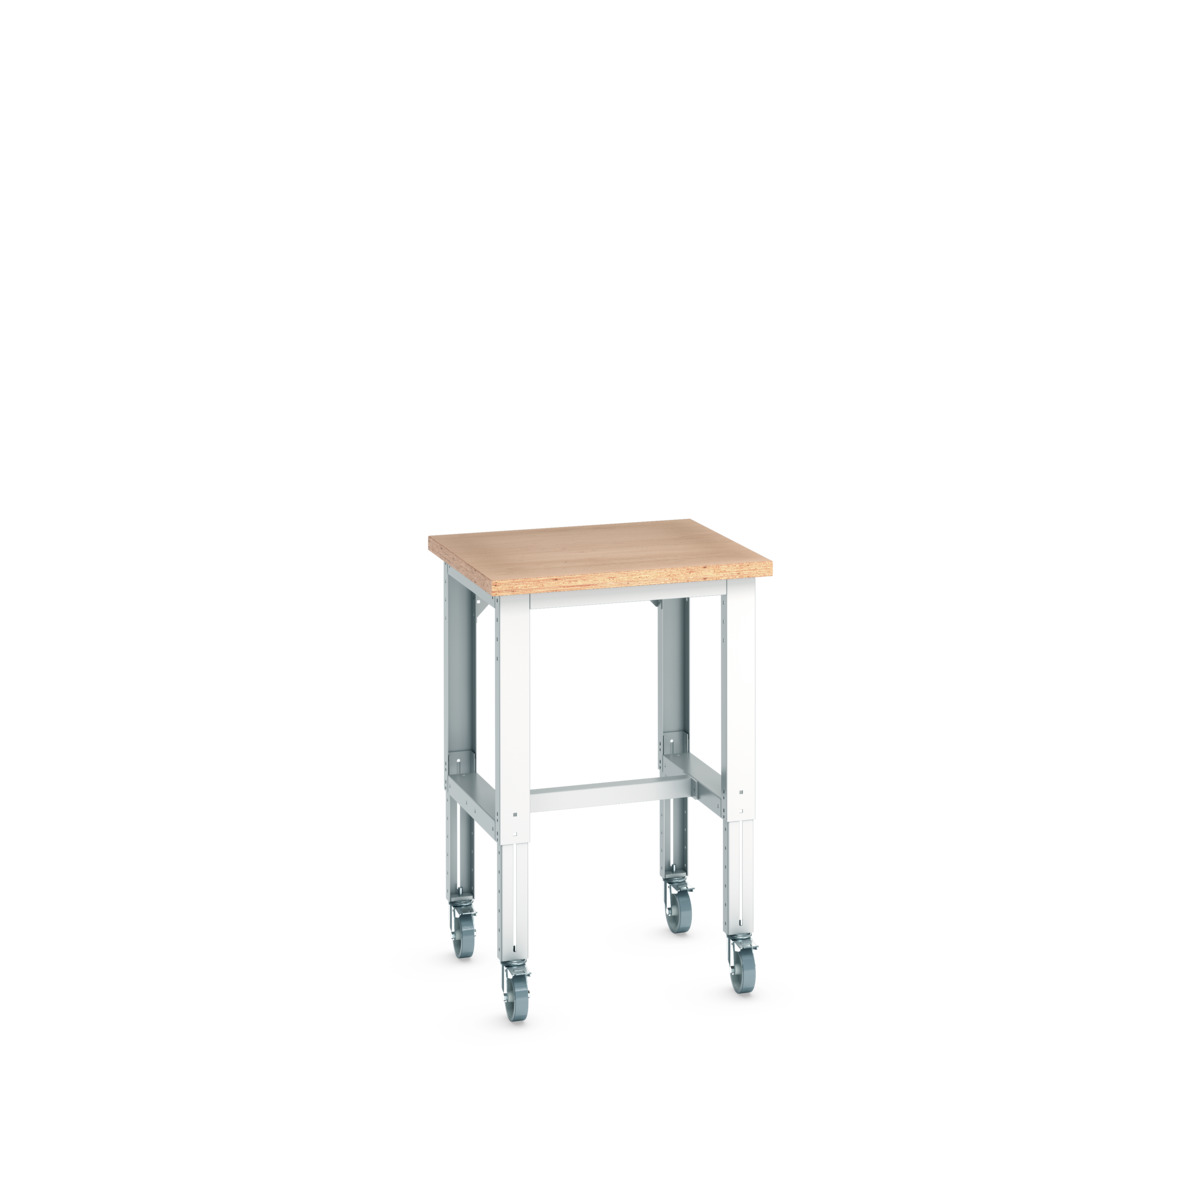 41003265.16V - cubio mobile bench adj height (mpx)